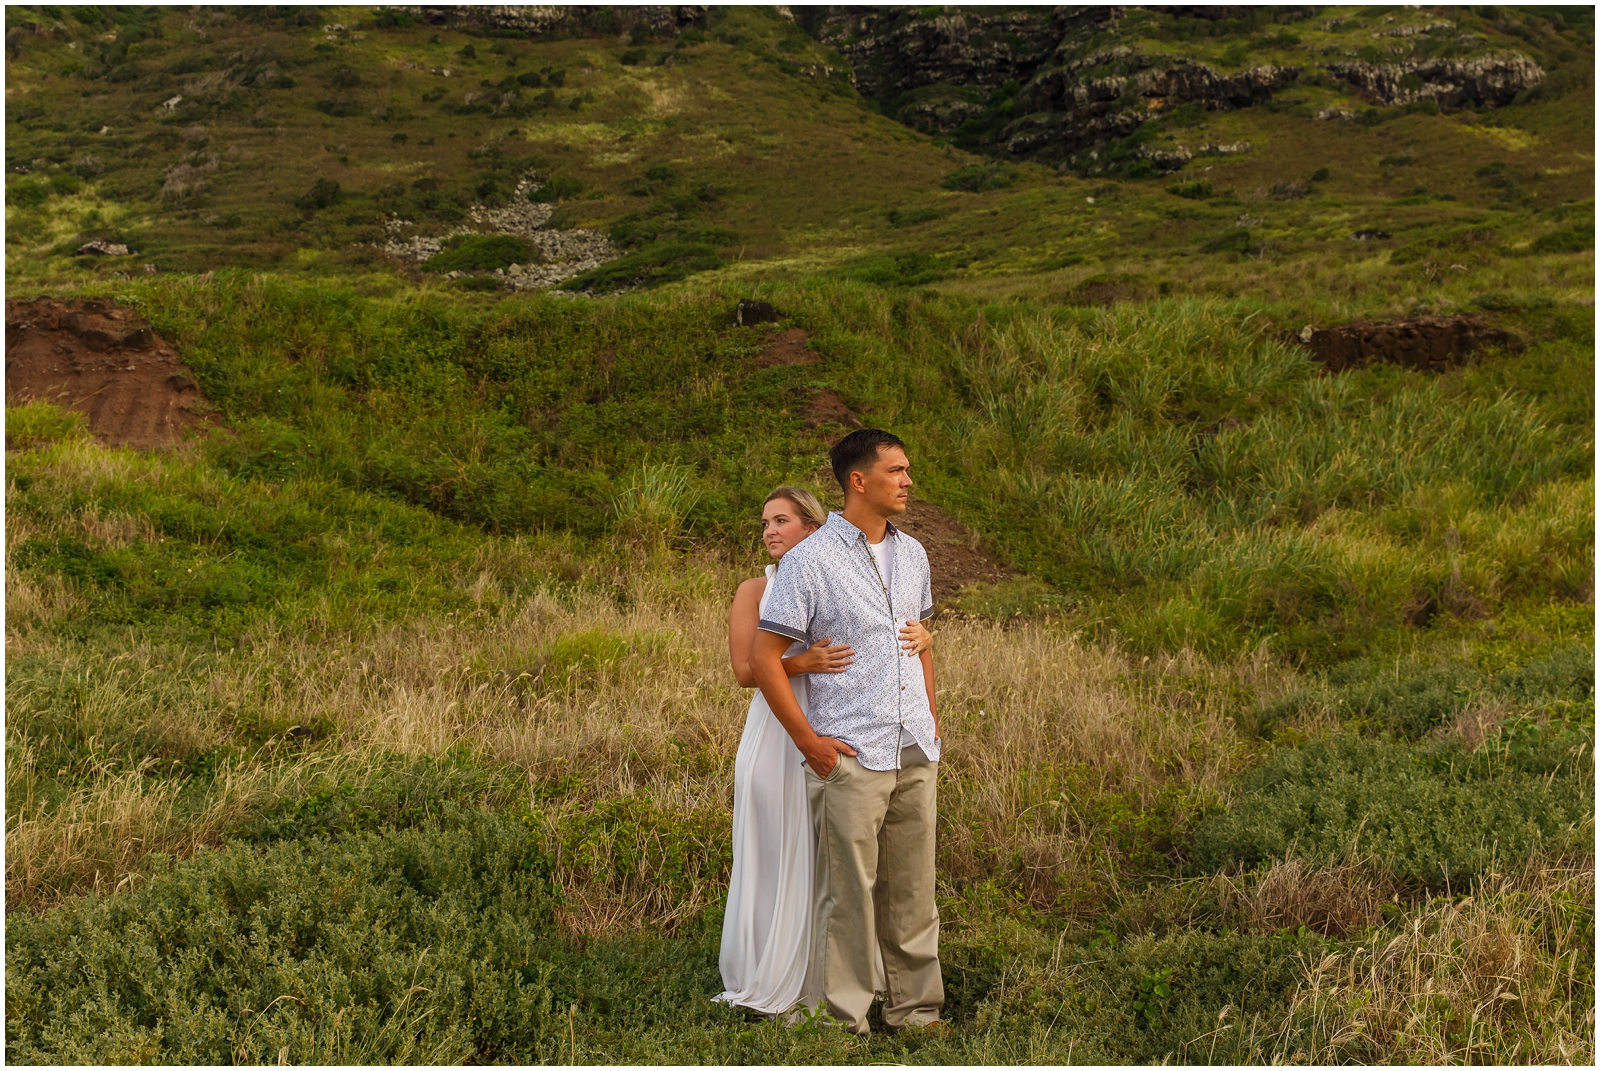 This couple's wedding venue was the dramatic cliffs of Hawaii.